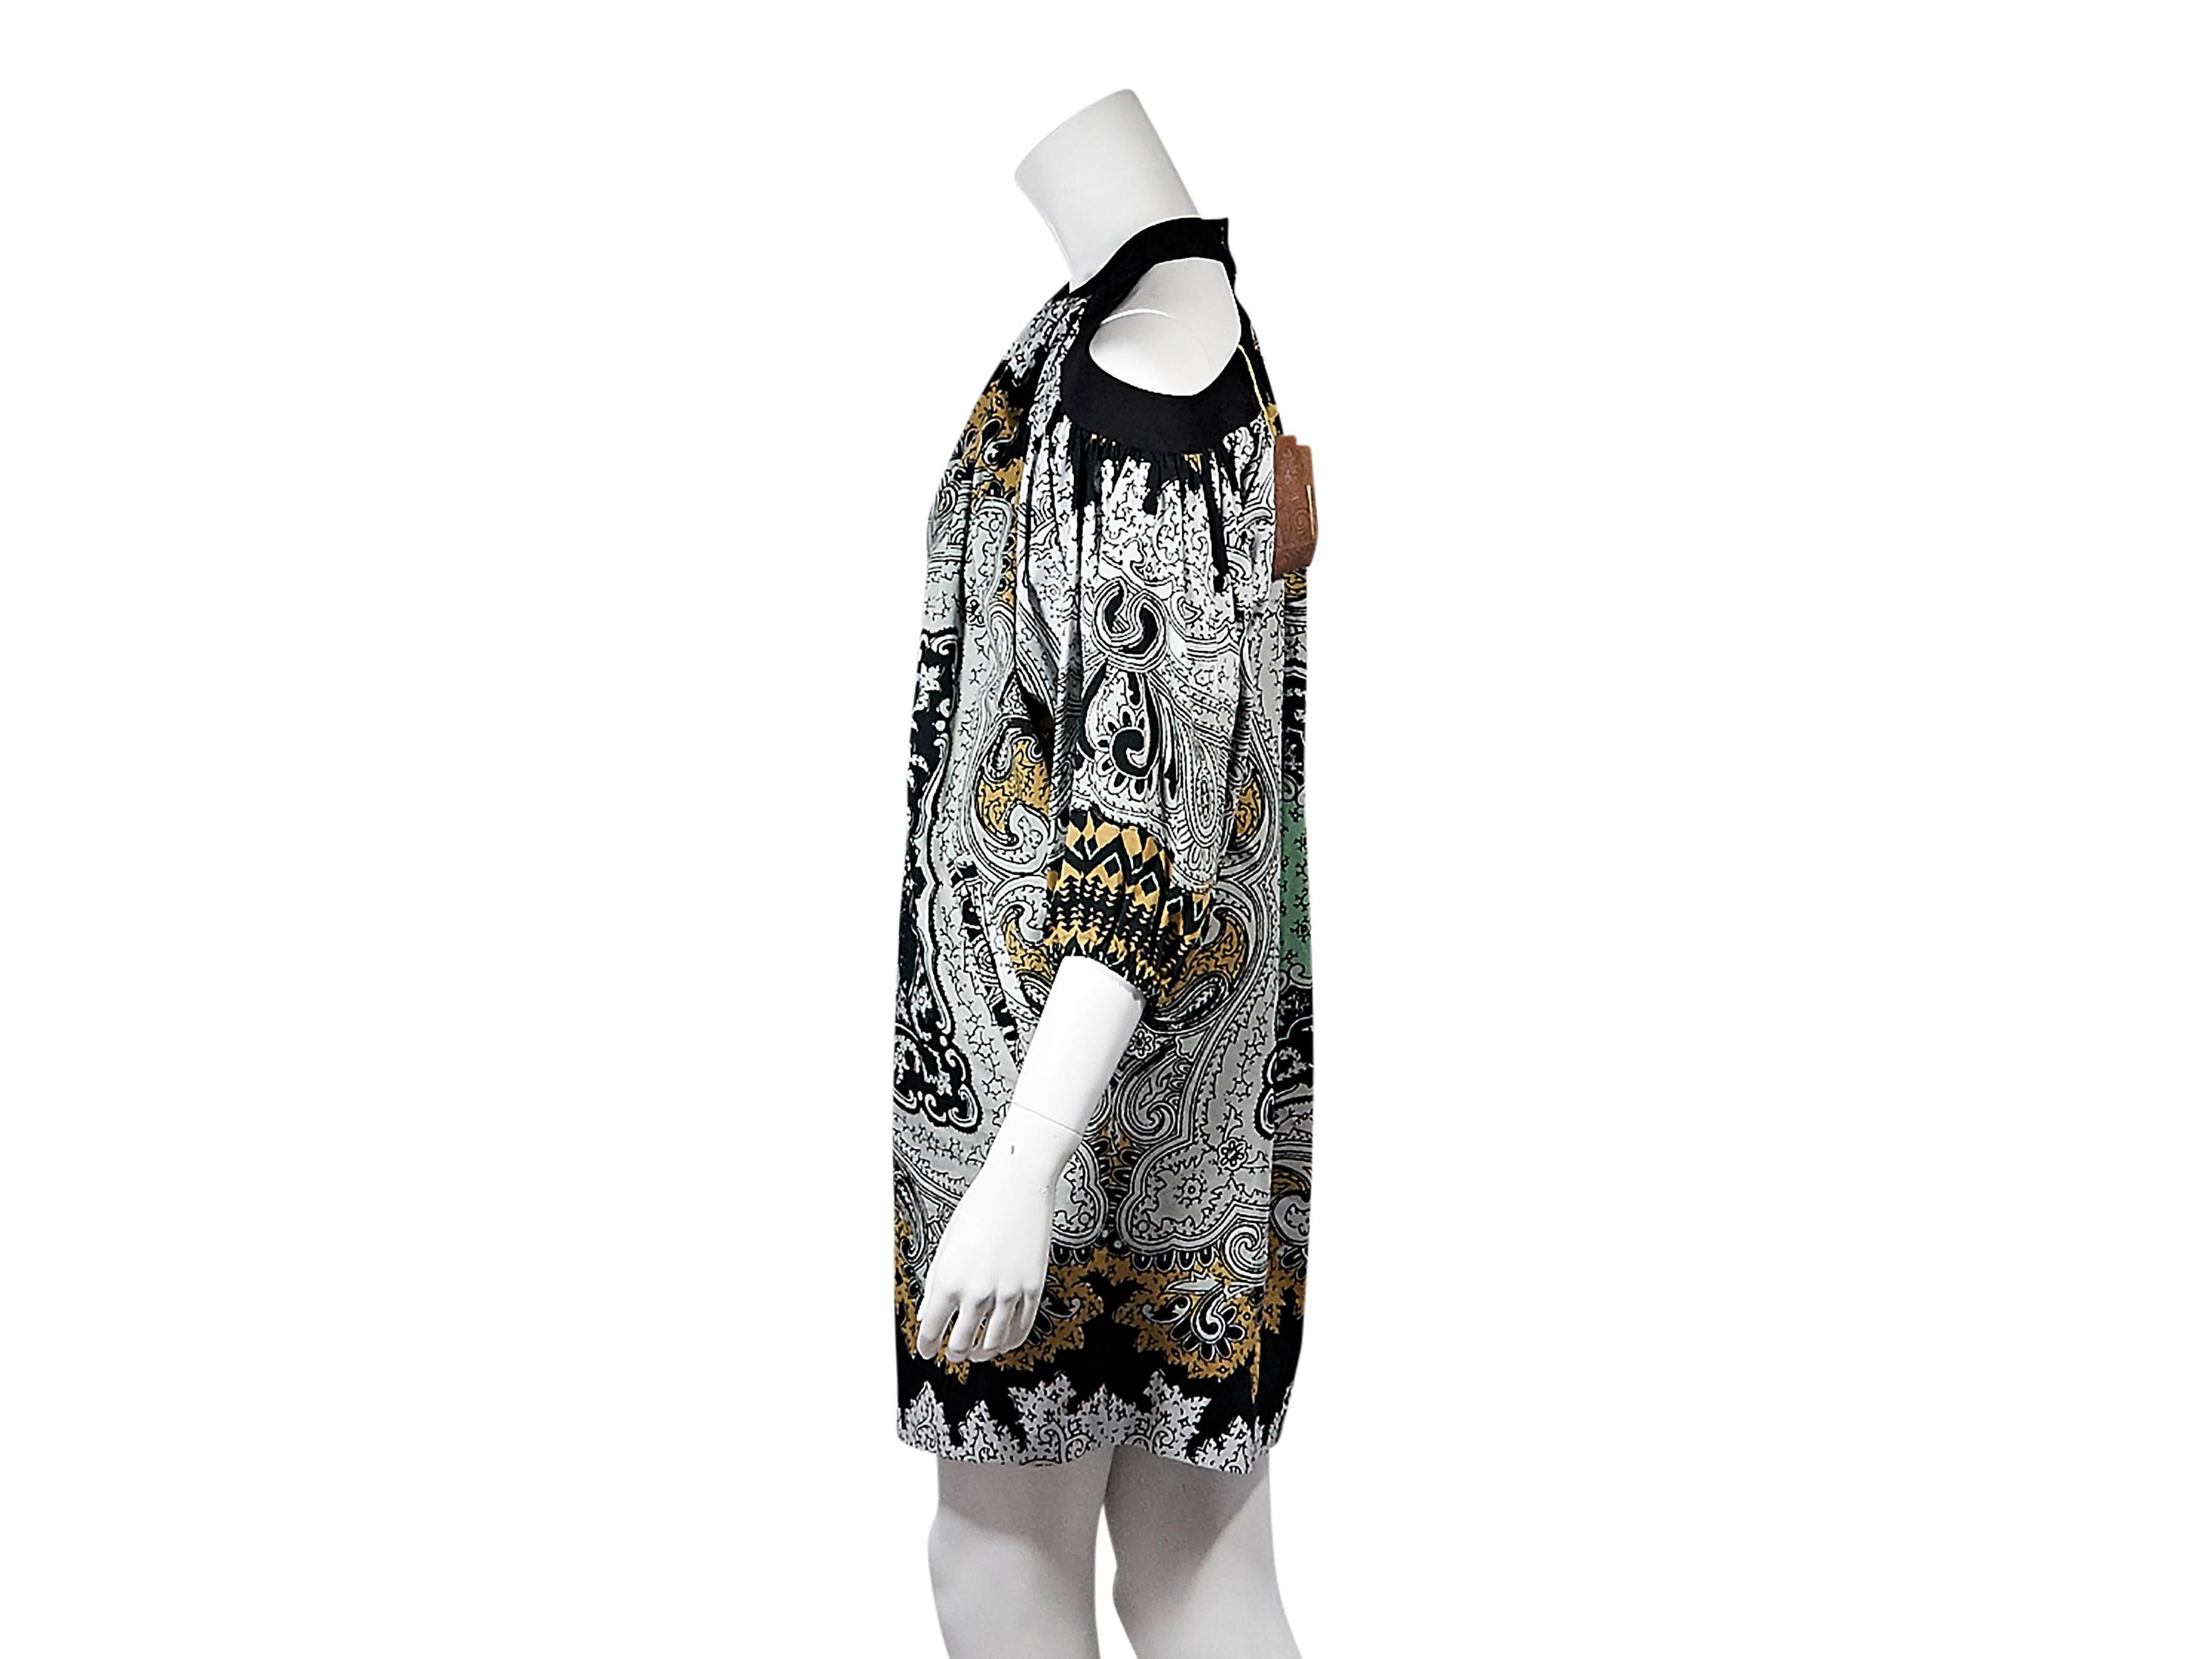 Product details: Multicolor printed cold-shoulder dress by Etro. Crewneck. Elbow-length sleeves. Elasticized cuffs. Back button closure with keyhole cutout. Label size IT 38. 
Condition: Pre-owned. New with tags.

Est. Retail $ 828.00